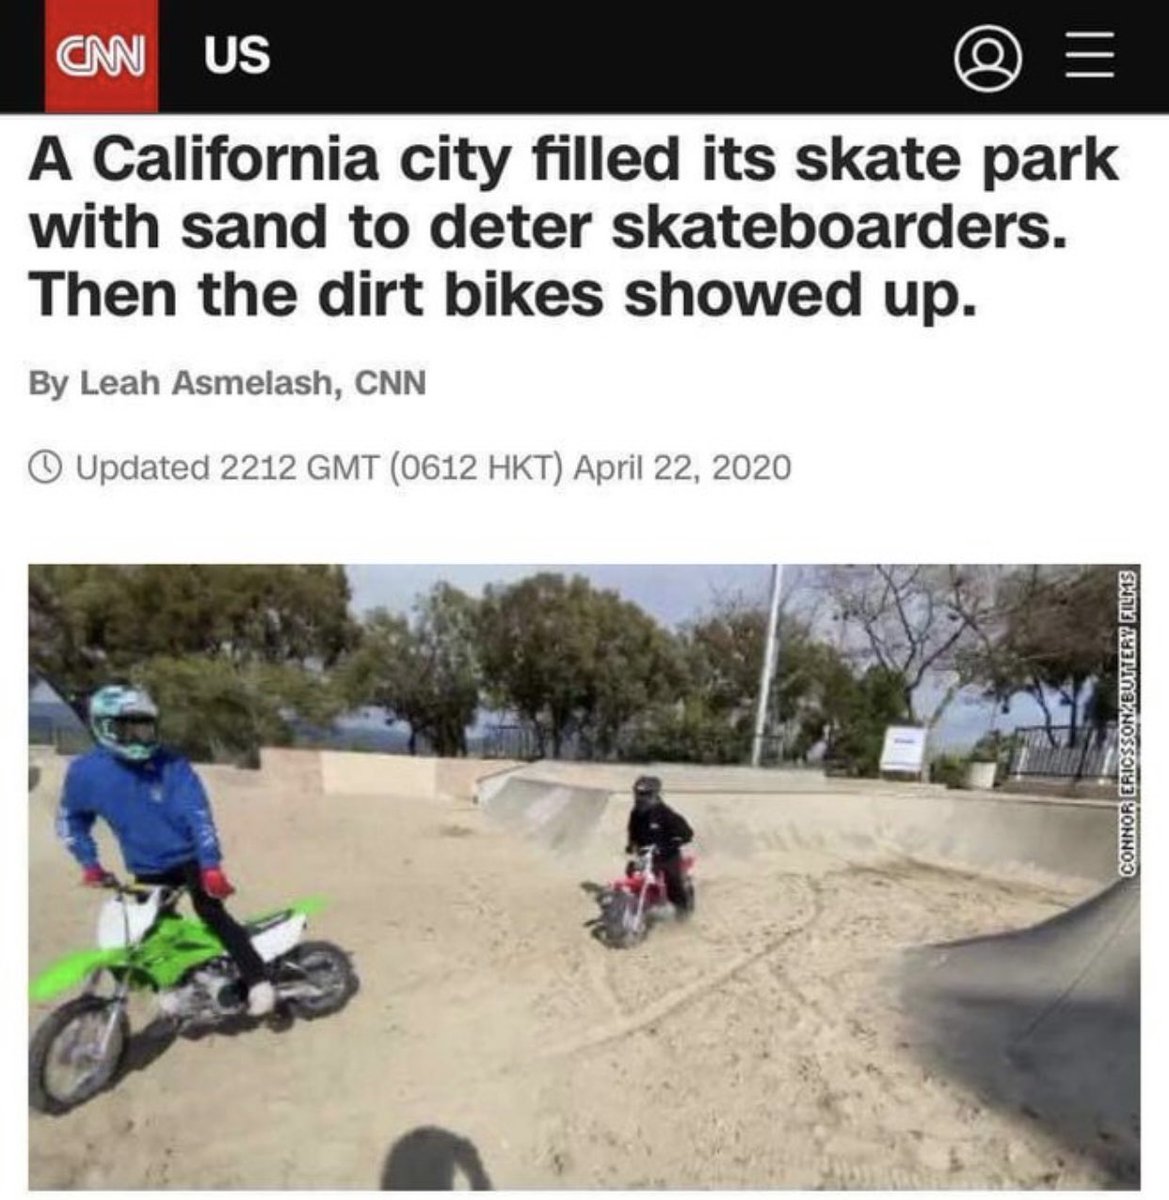 dudes posting wins - there's always a bigger fish memes - Cmn Us A California city filled its skate park with sand to deter skateboarders. Then the dirt bikes showed up. By Leah Asmelash, Cnn Updated 2212 Gmt 0612 Hkt Connor Ericsson Buttery Films